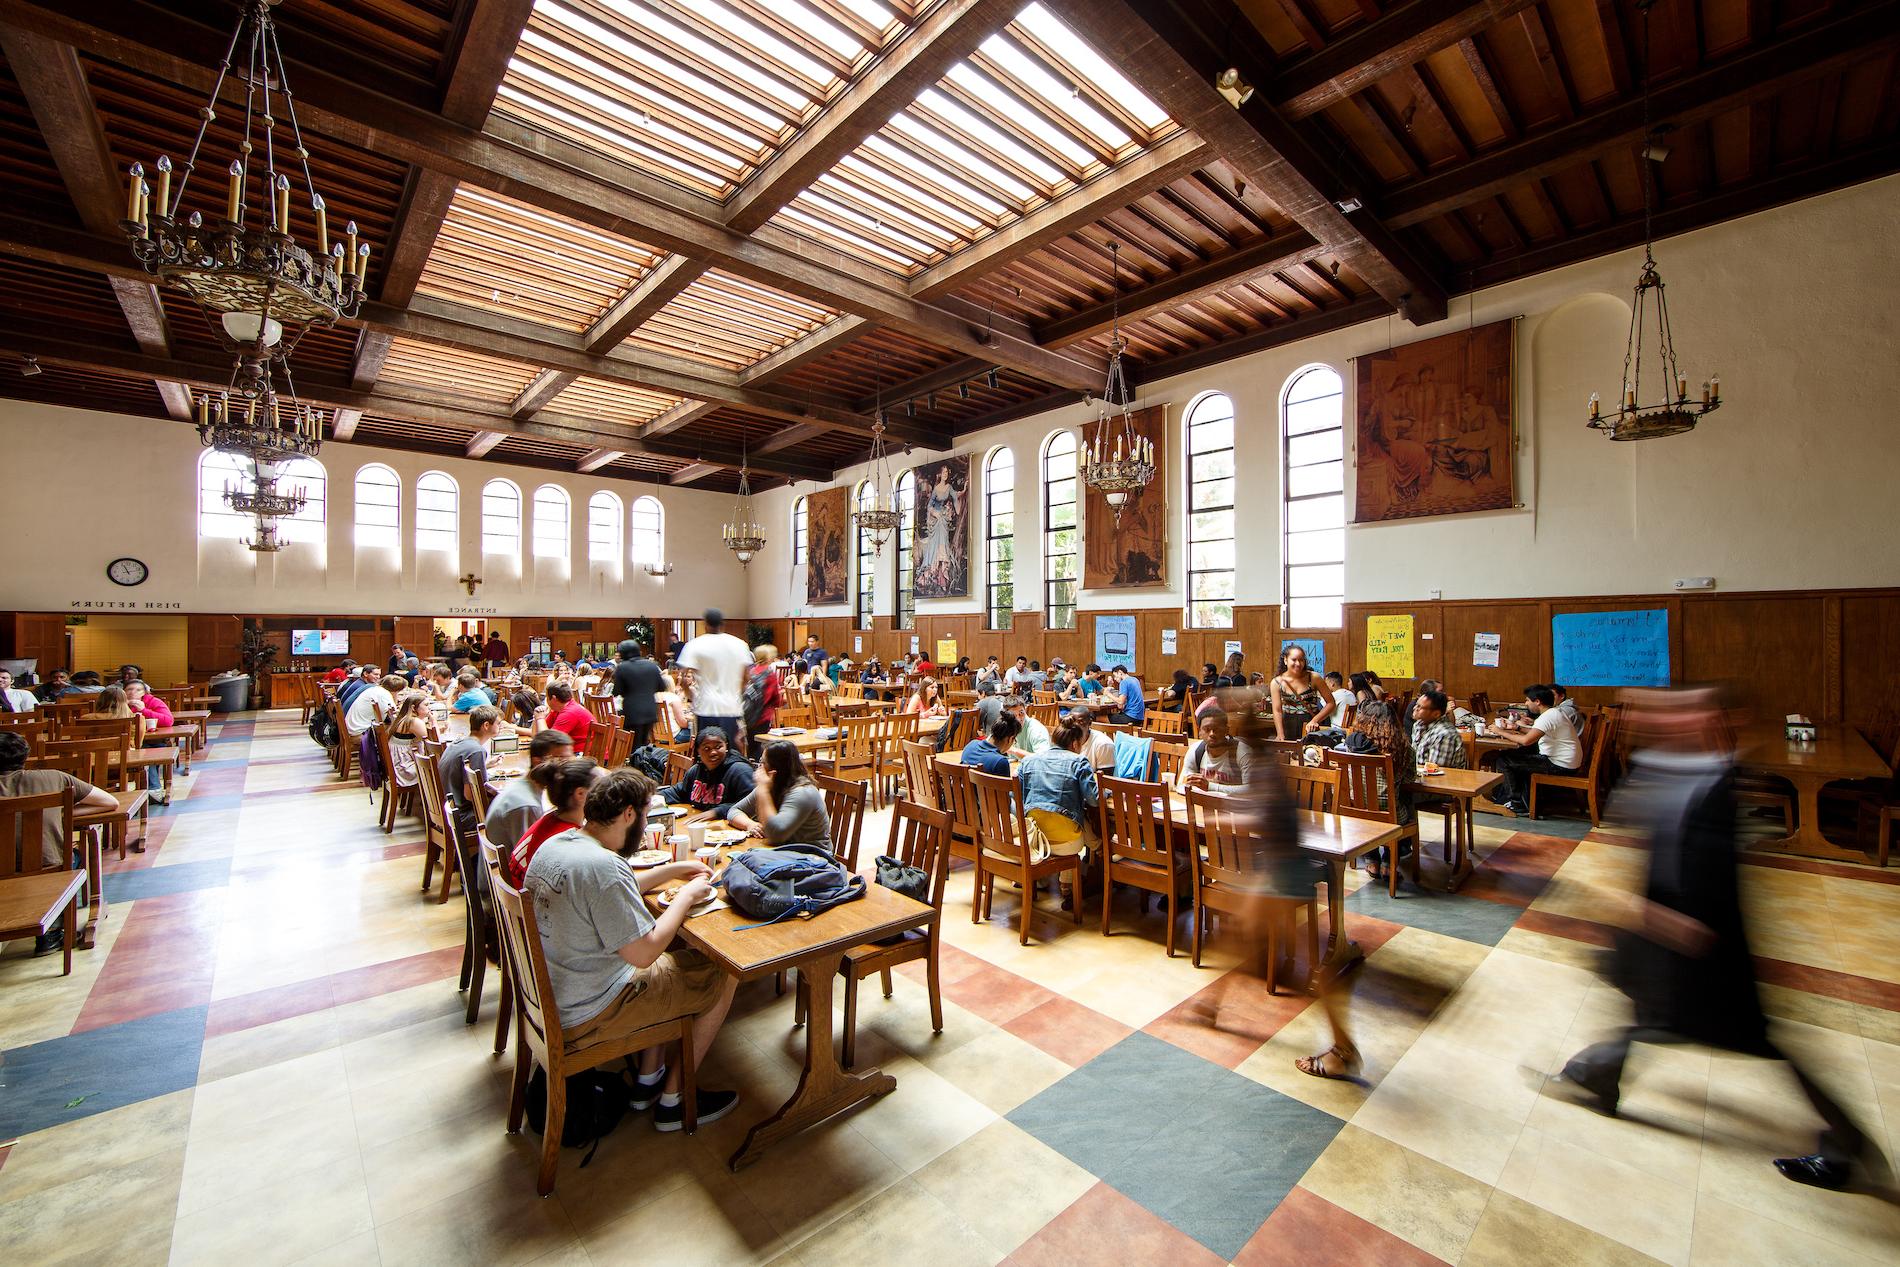 Students in Oliver Hall in September 2022